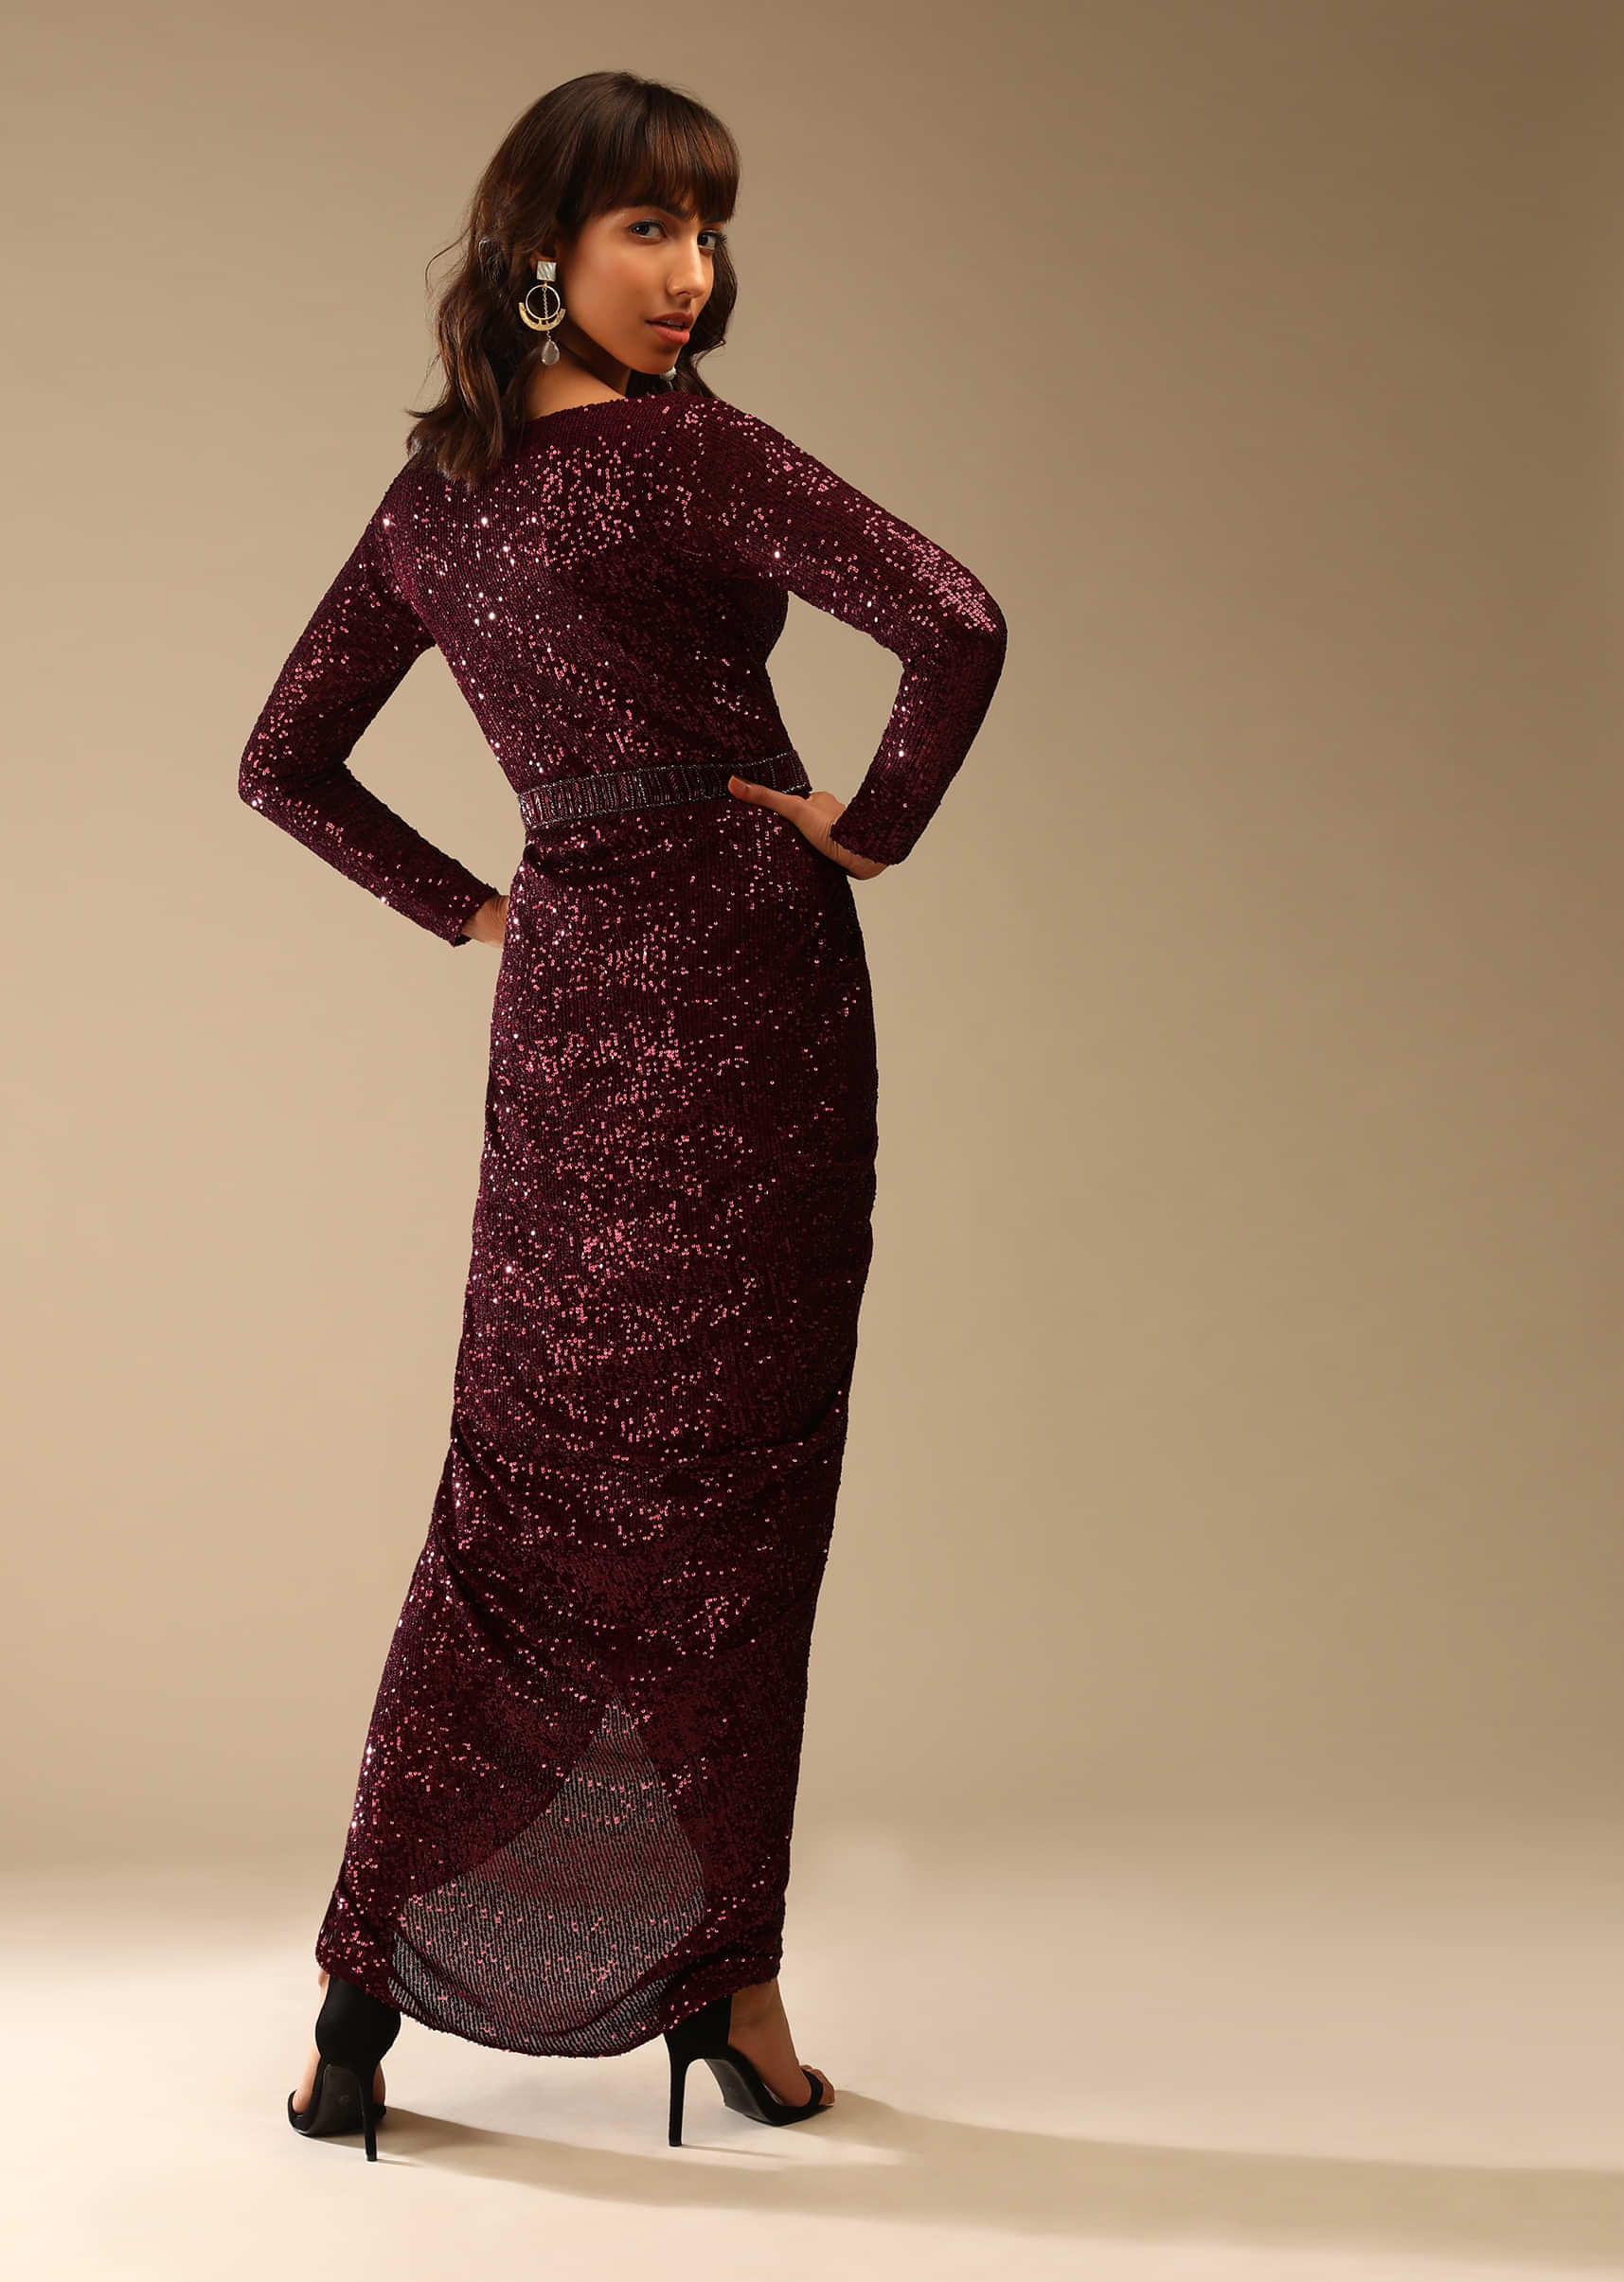 Burgundy Gown Embellished In Sequins With Fancy Drape Silhouette And Plunging V Neckline